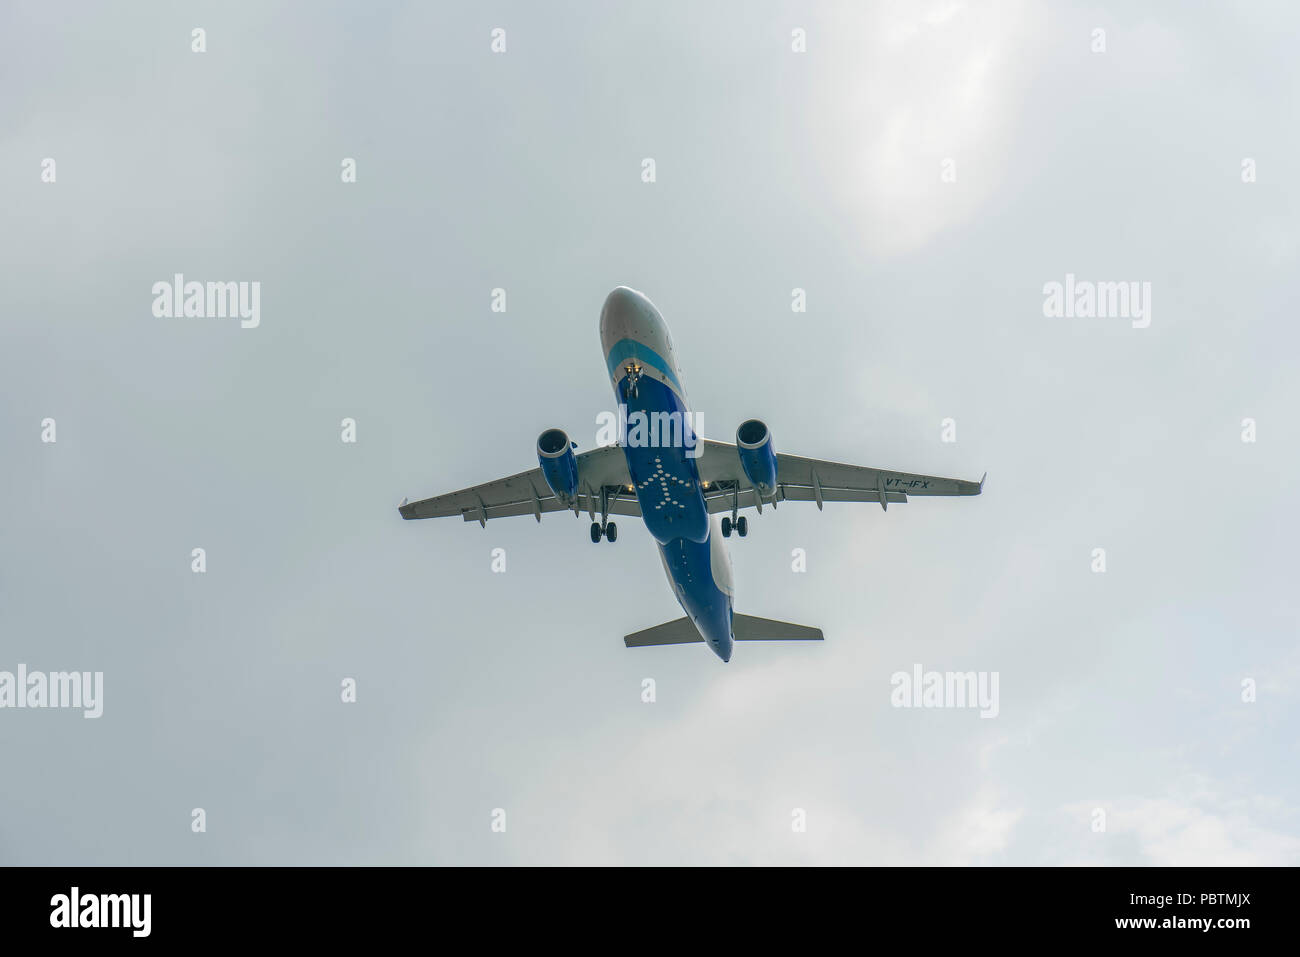 Singapore - June 03 2018: Indian Airliner on final Approach into Changi Airport Stock Photo